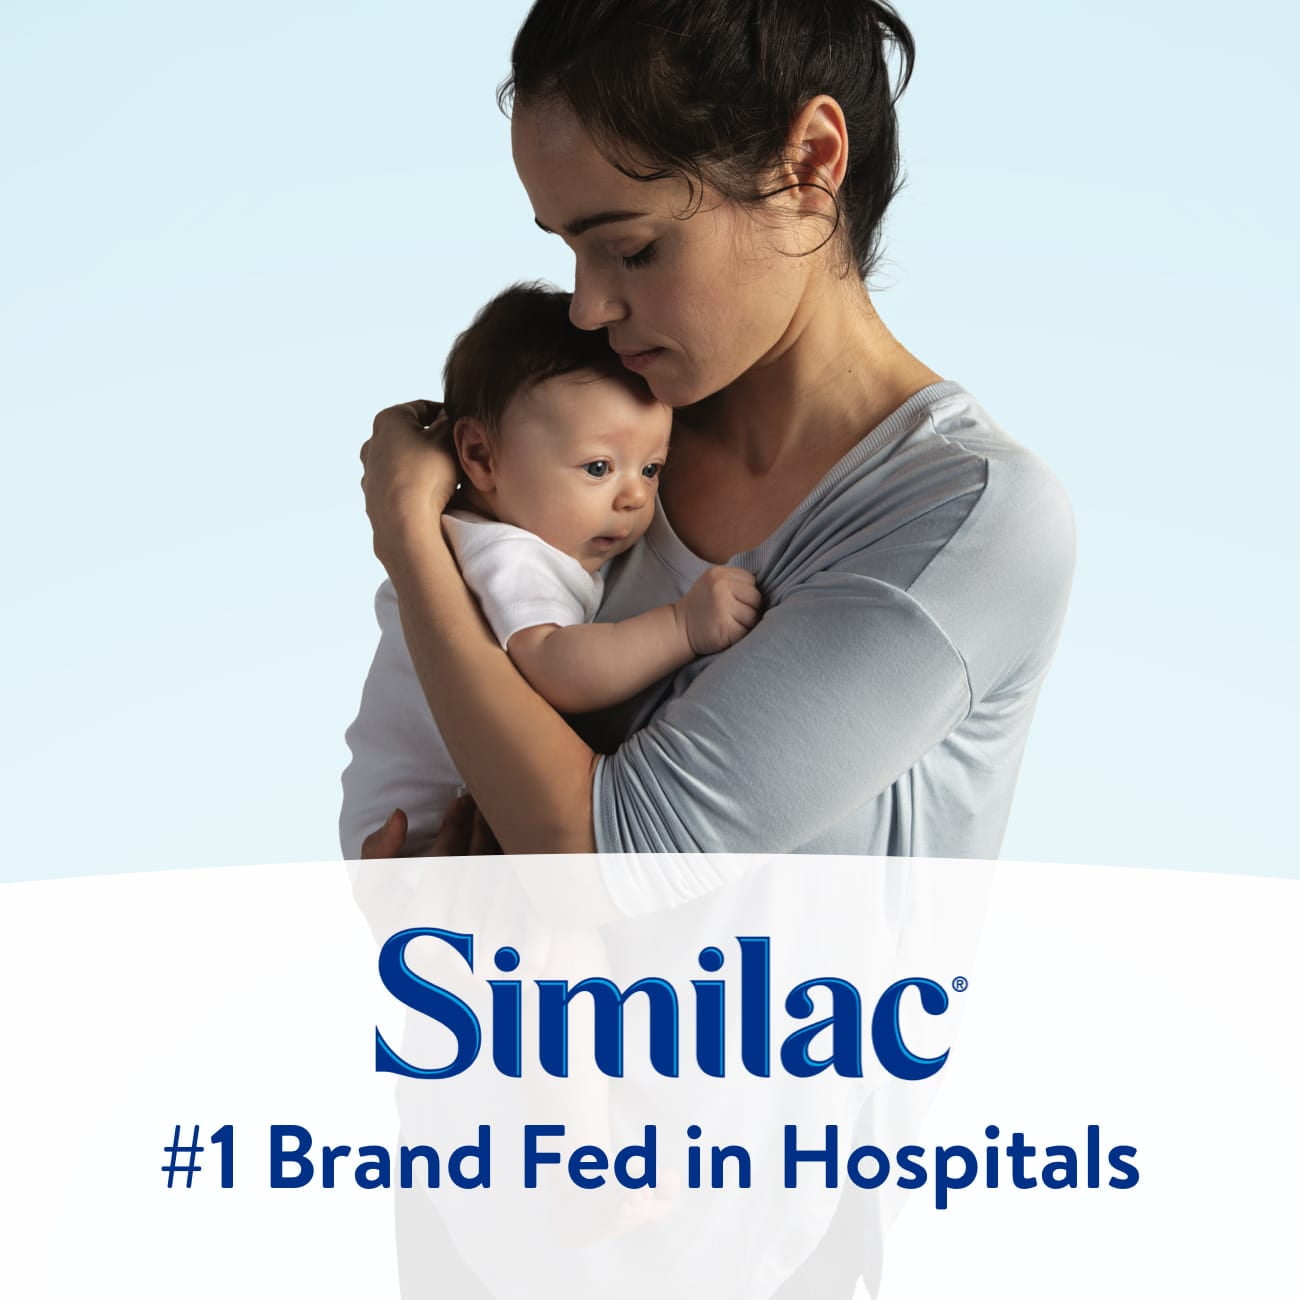 Wholesale prices with free shipping all over United States Similac® Advance®* Powder Baby Formula with Iron, DHA, Lutein, 12.4-oz Can - Steven Deals